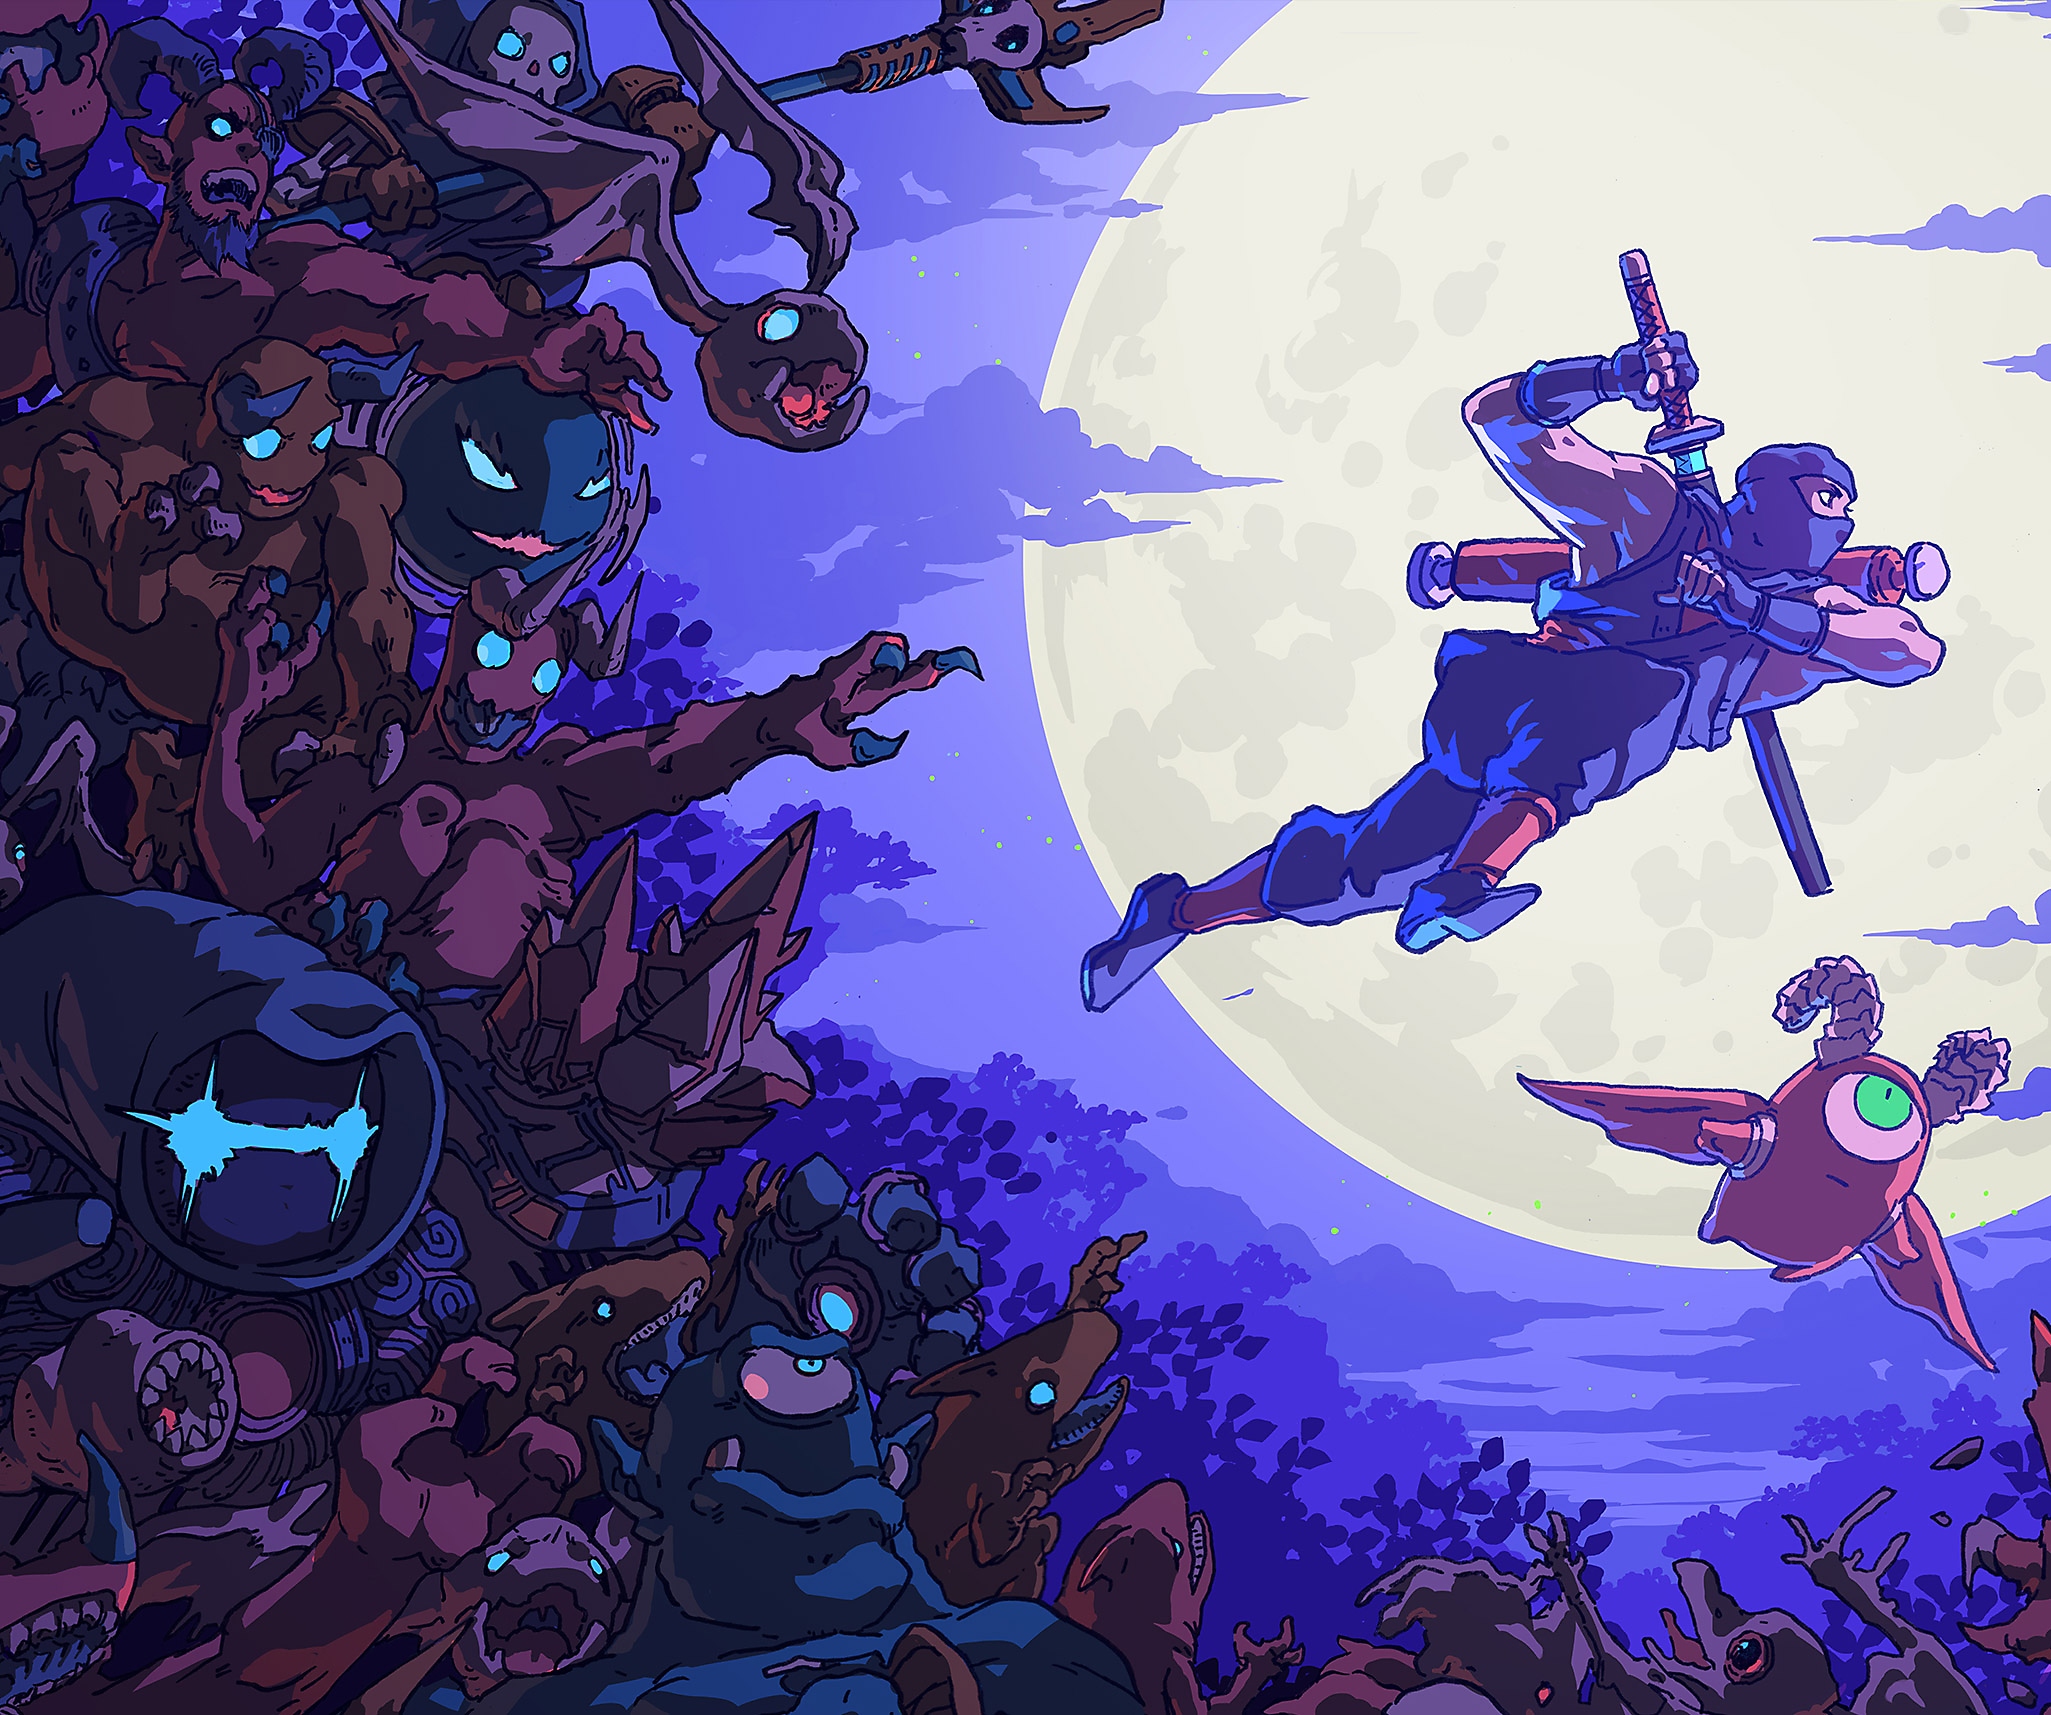 The Messenger key art featuring a a hand-drawn image of a ninja souring through a moonlit sky.